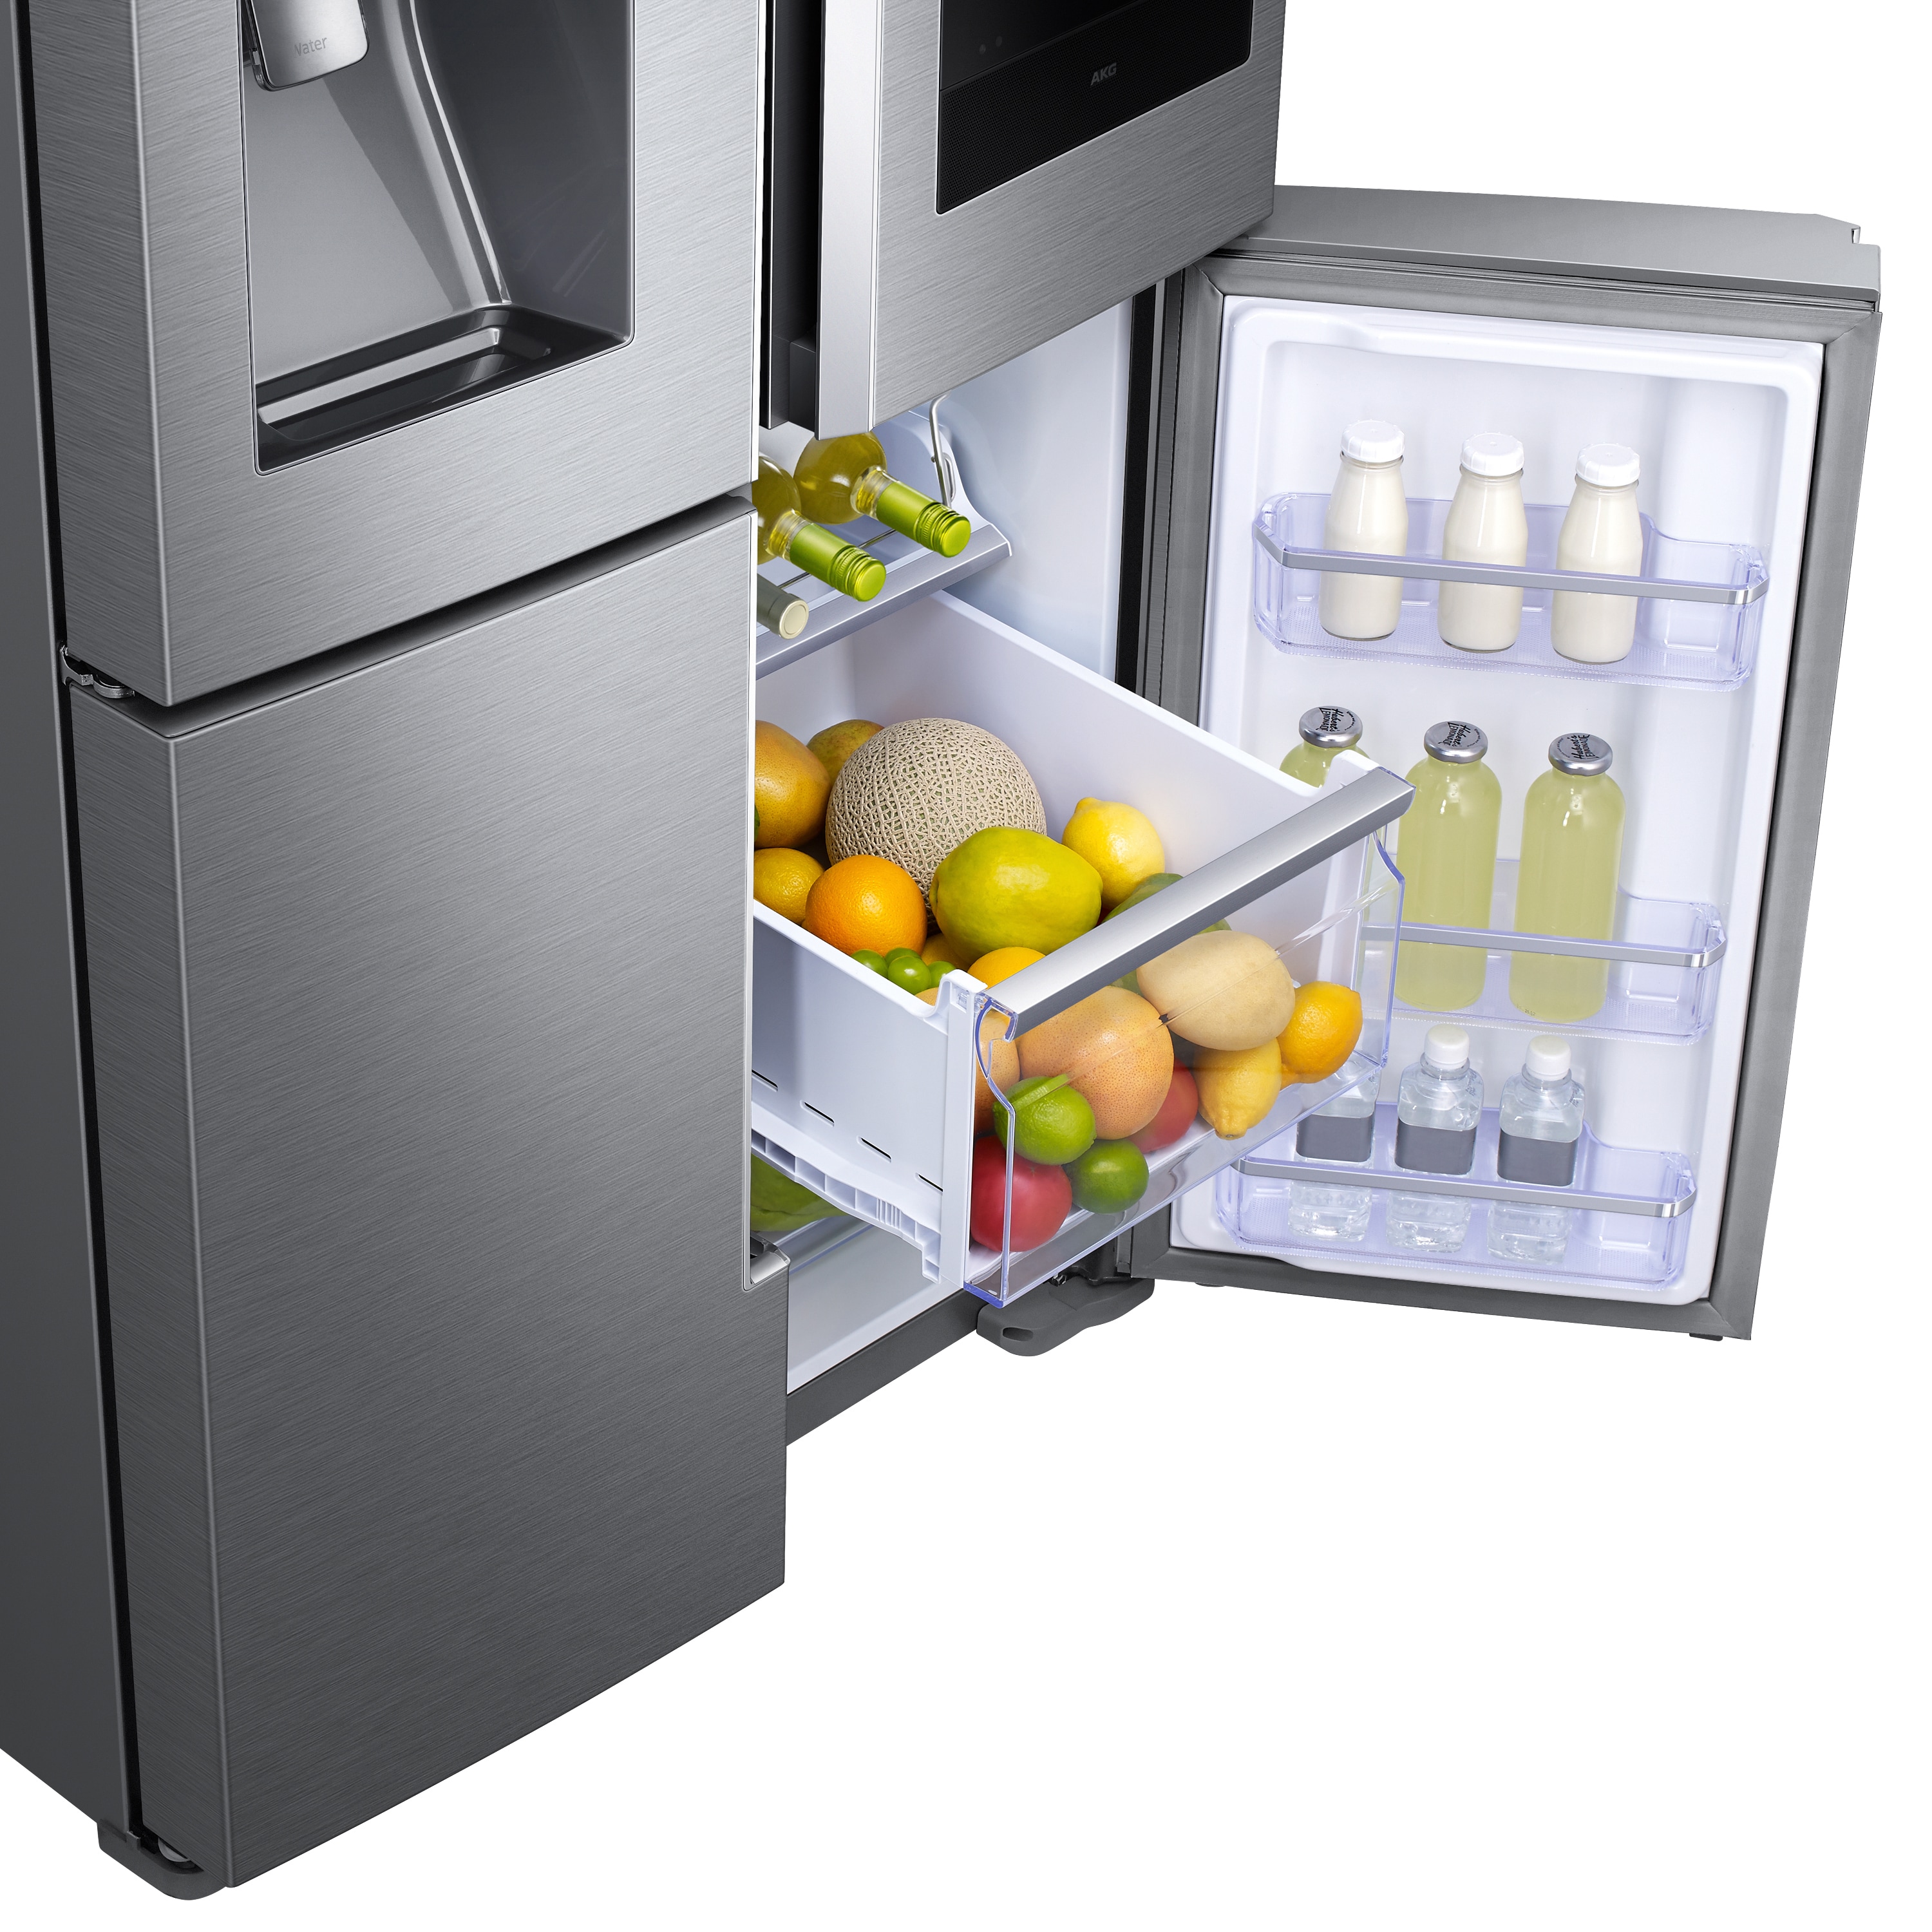 Samsung Family Hub Refrigerator Review: Brains With A Cool Factor